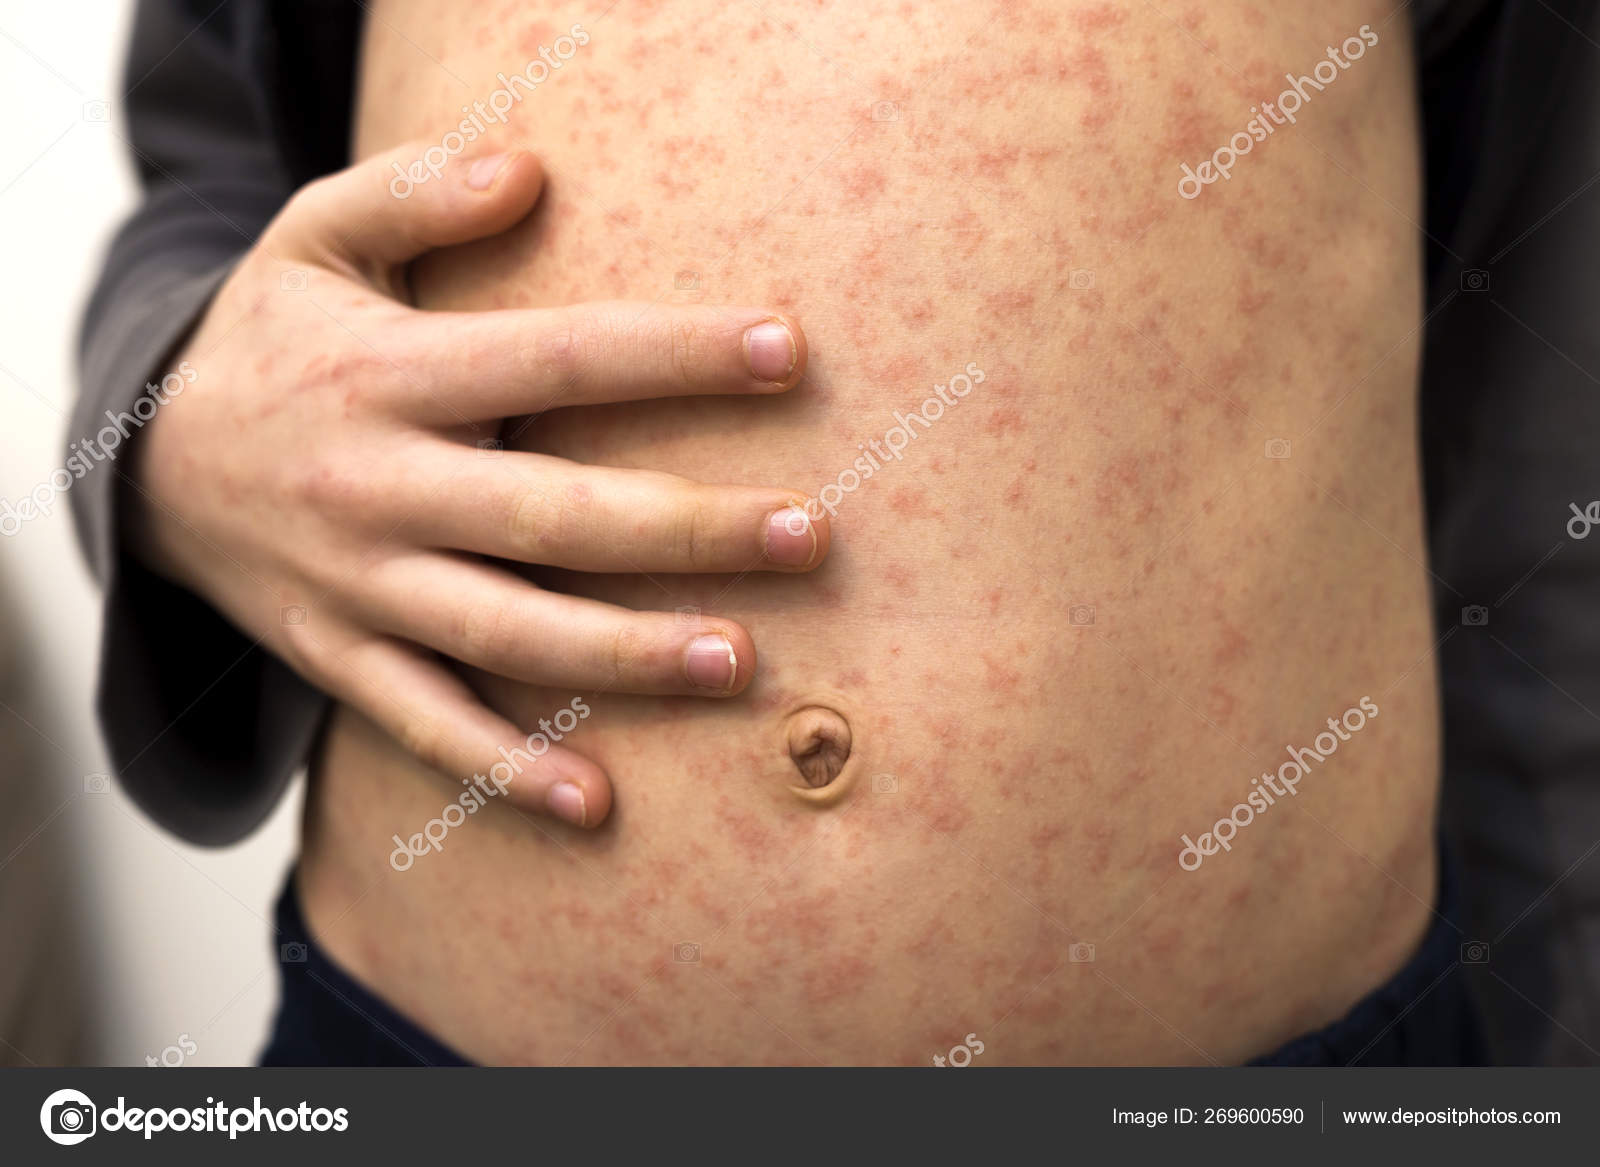 Sick child body, stomach with red rush spots from measles or chicken pox.  Contagious child diseases and treatment. Stock Photo by ©bilanol.i.ua  269600590